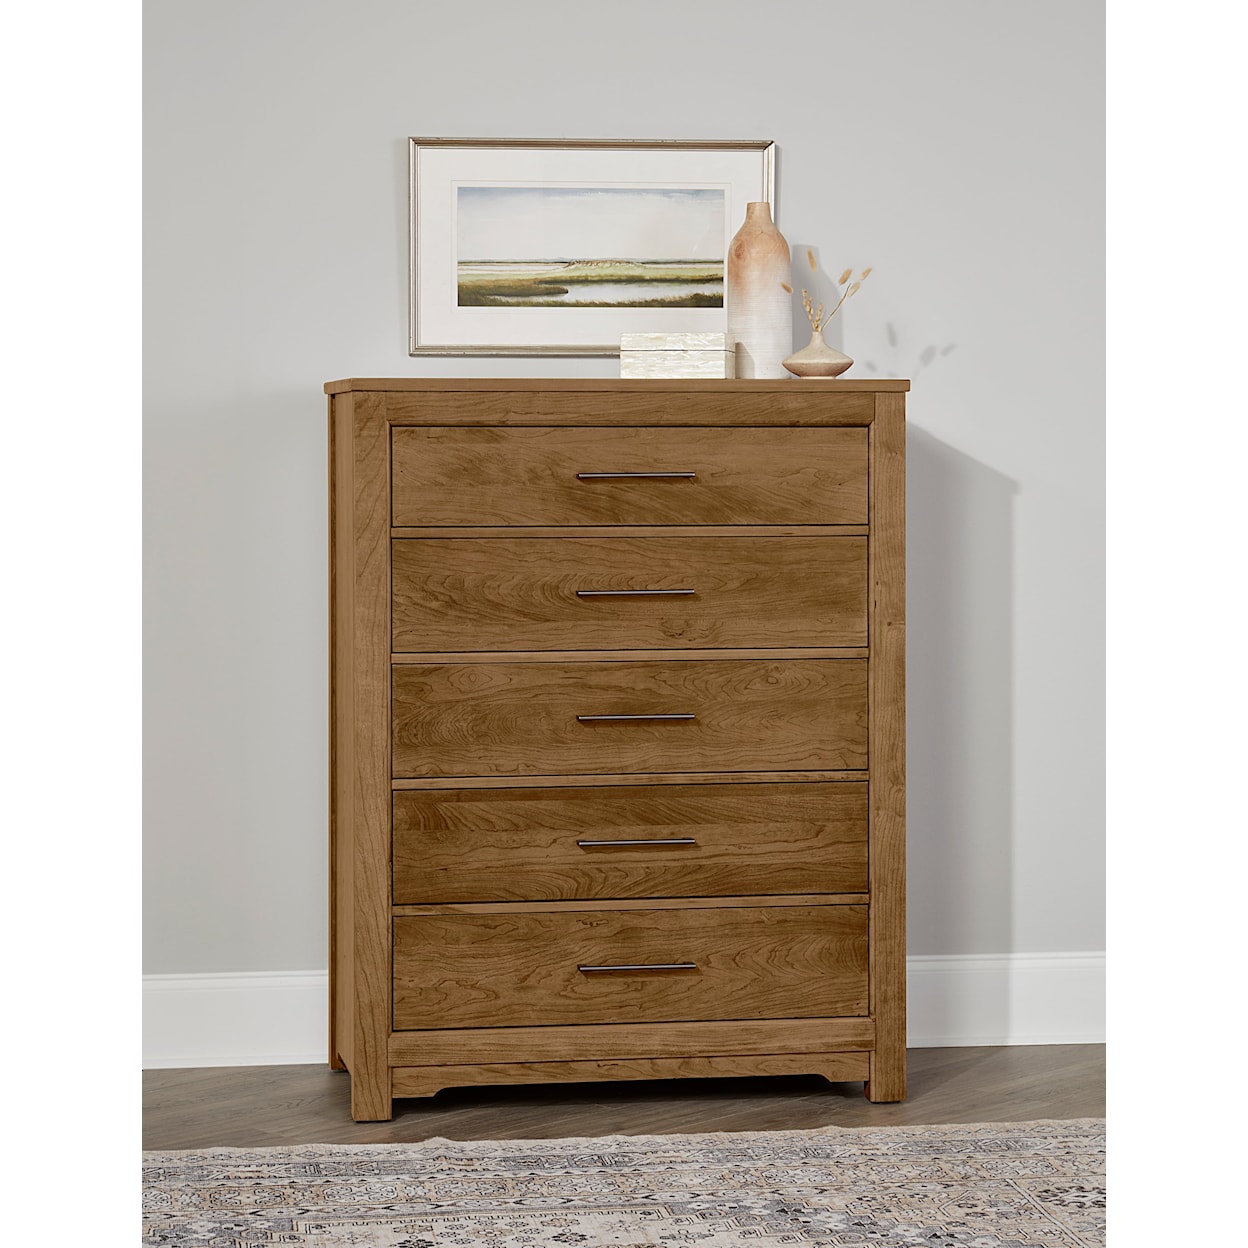 Artisan & Post Crafted Cherry Chest of Drawers